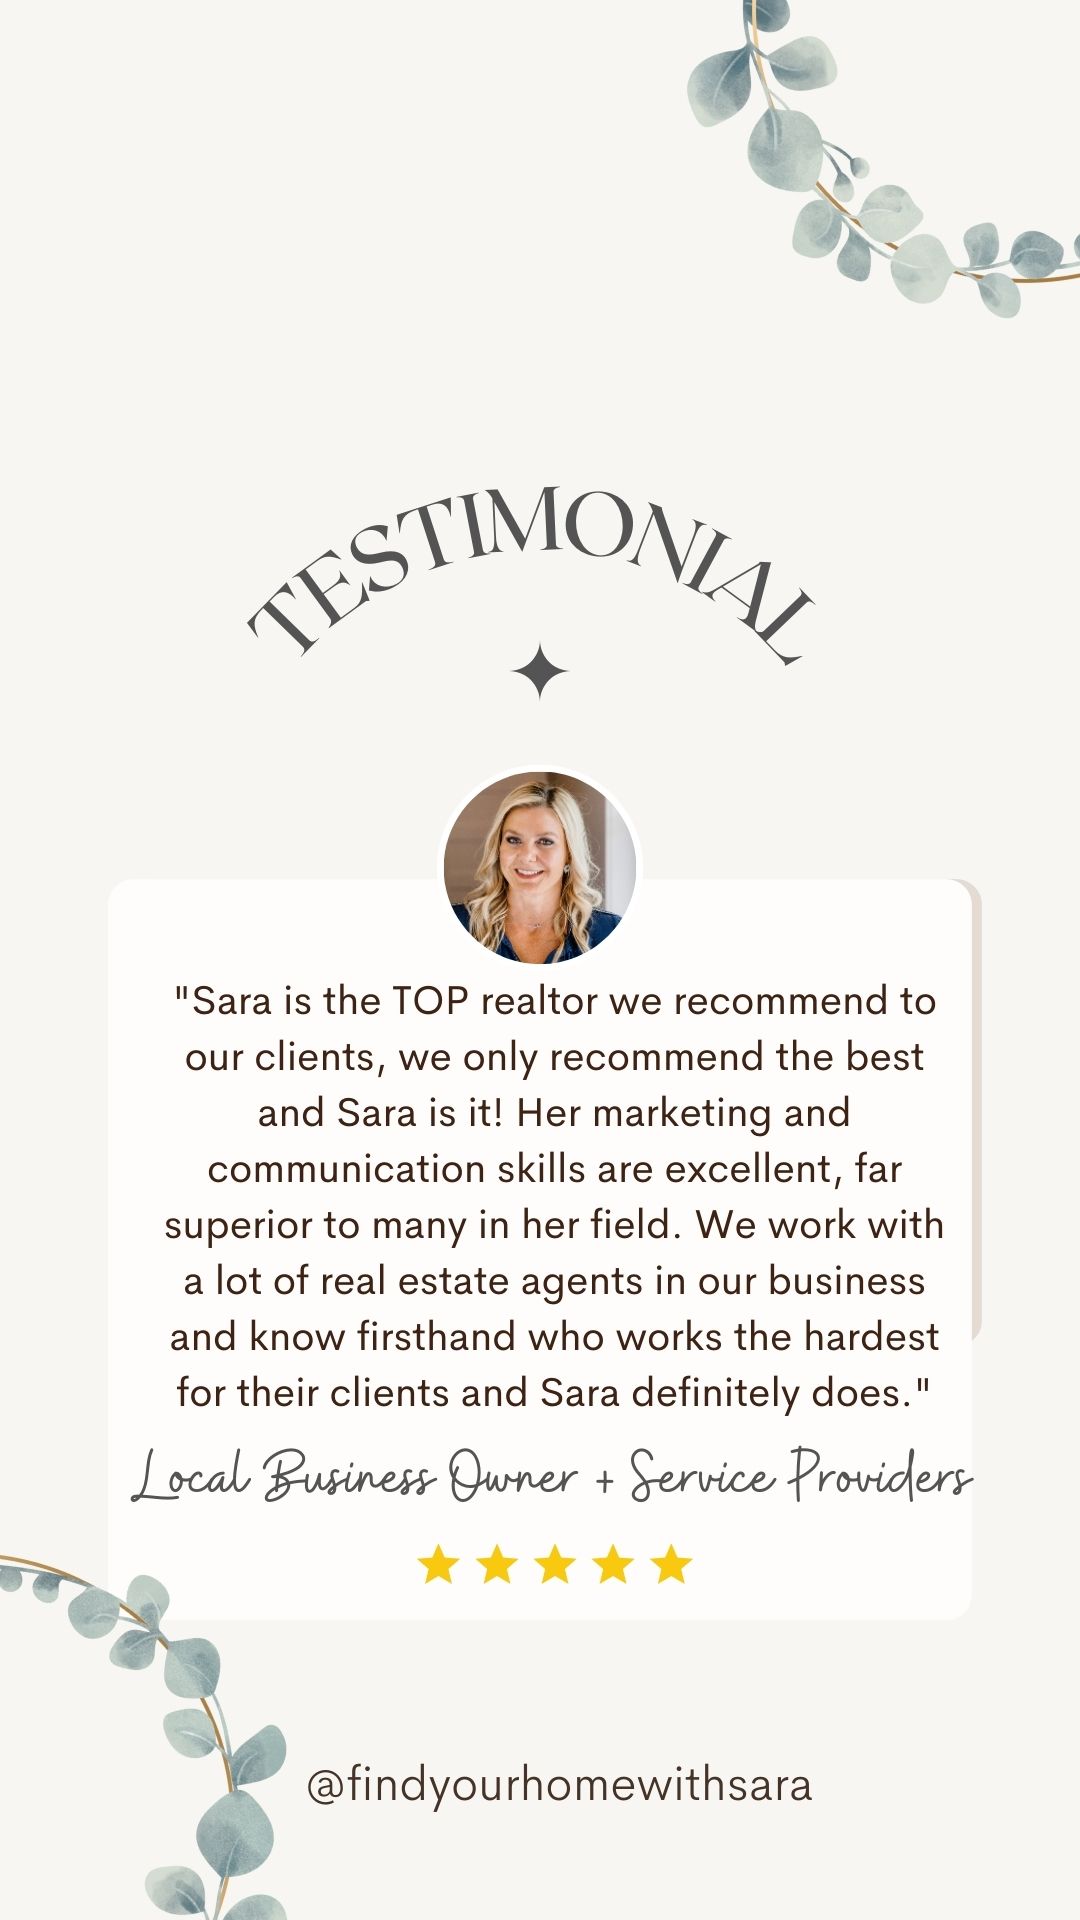 Sara is the TOP realtor we recommend to our clients, we only recommend the best and Sara is it! Her marketing and communication skills are excellent, far superior to many in her field. We work with a lot of real estate agents in our business and know firsthand who works the hardest for their clients and Sara definitely does.